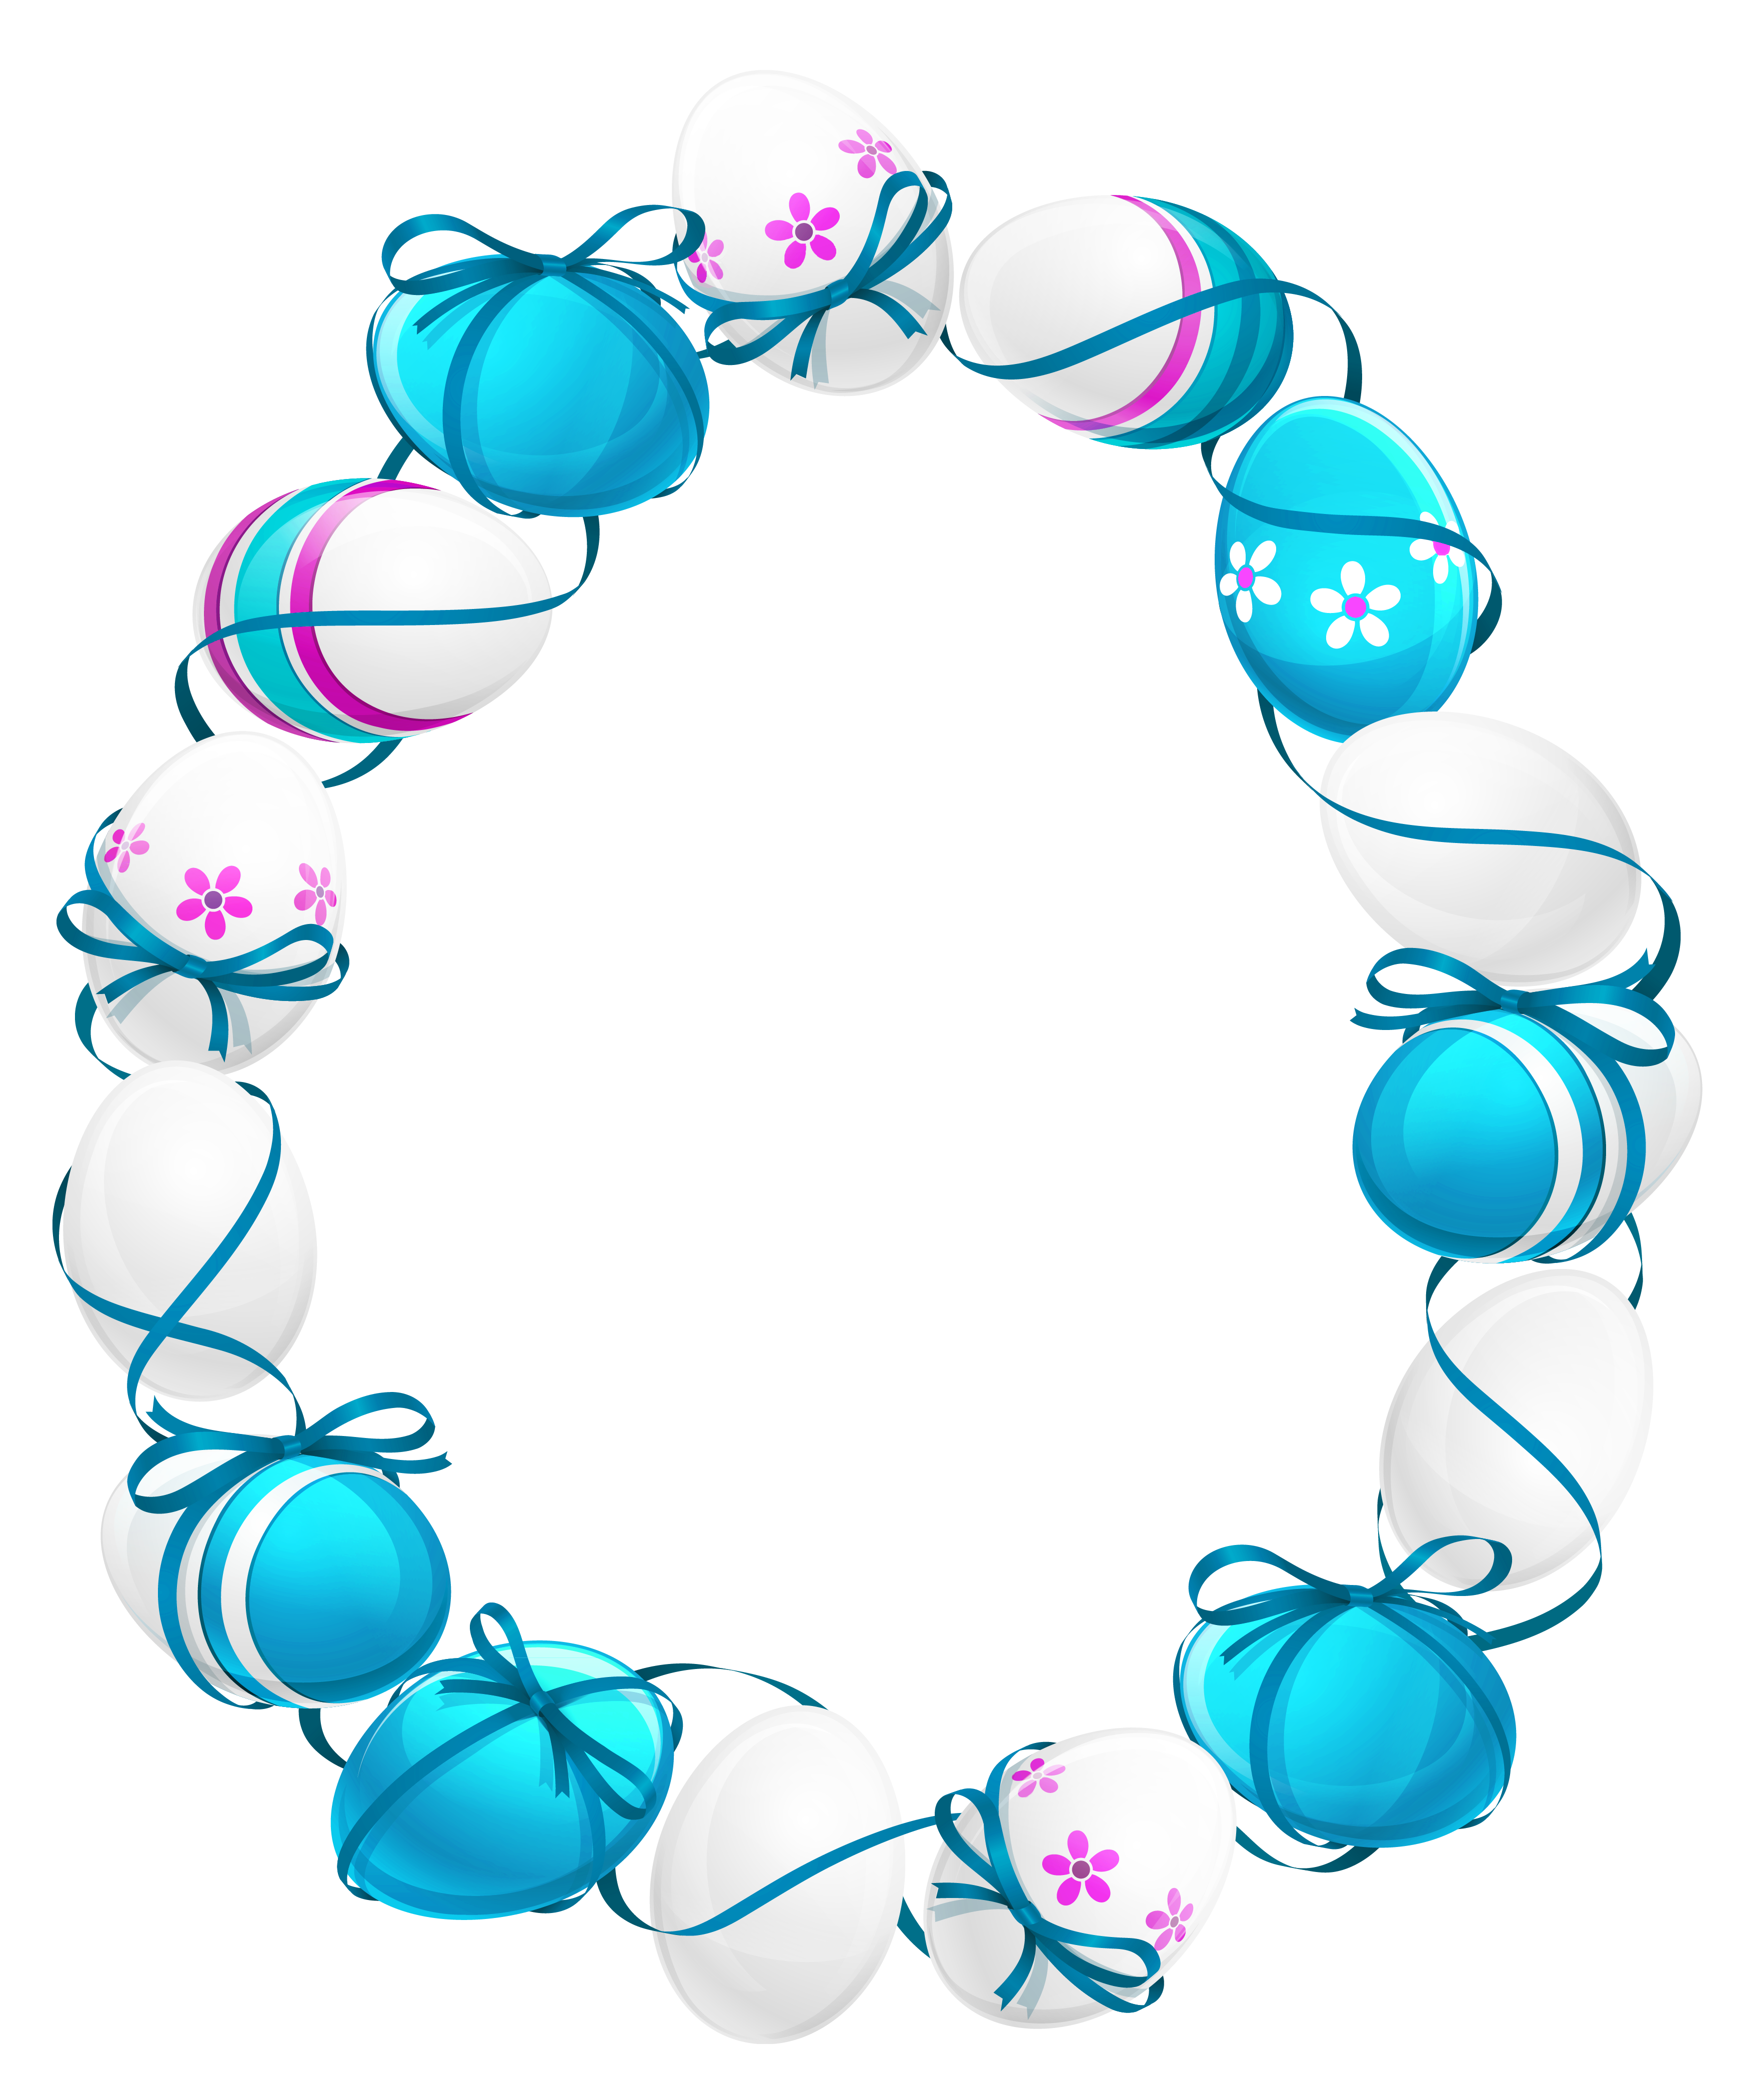 Easter Egg Oval Frame PNG Clipart Picture